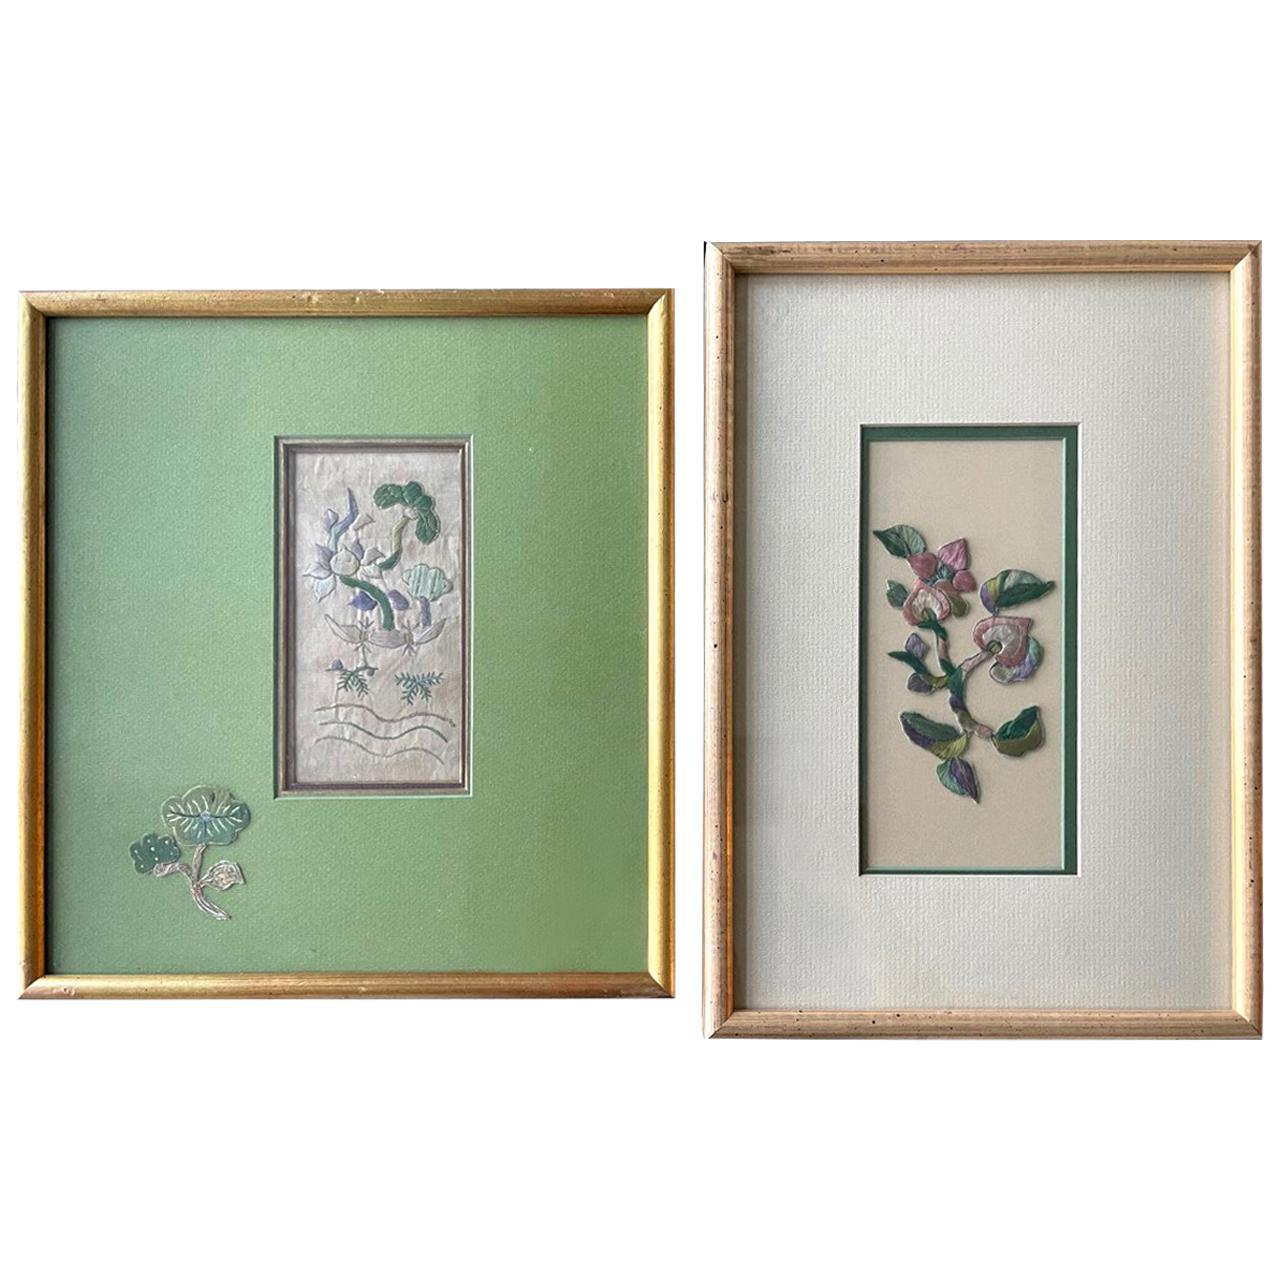 Two Framed Chinese Antique Textile Fragments Qing Dynasty Provenance